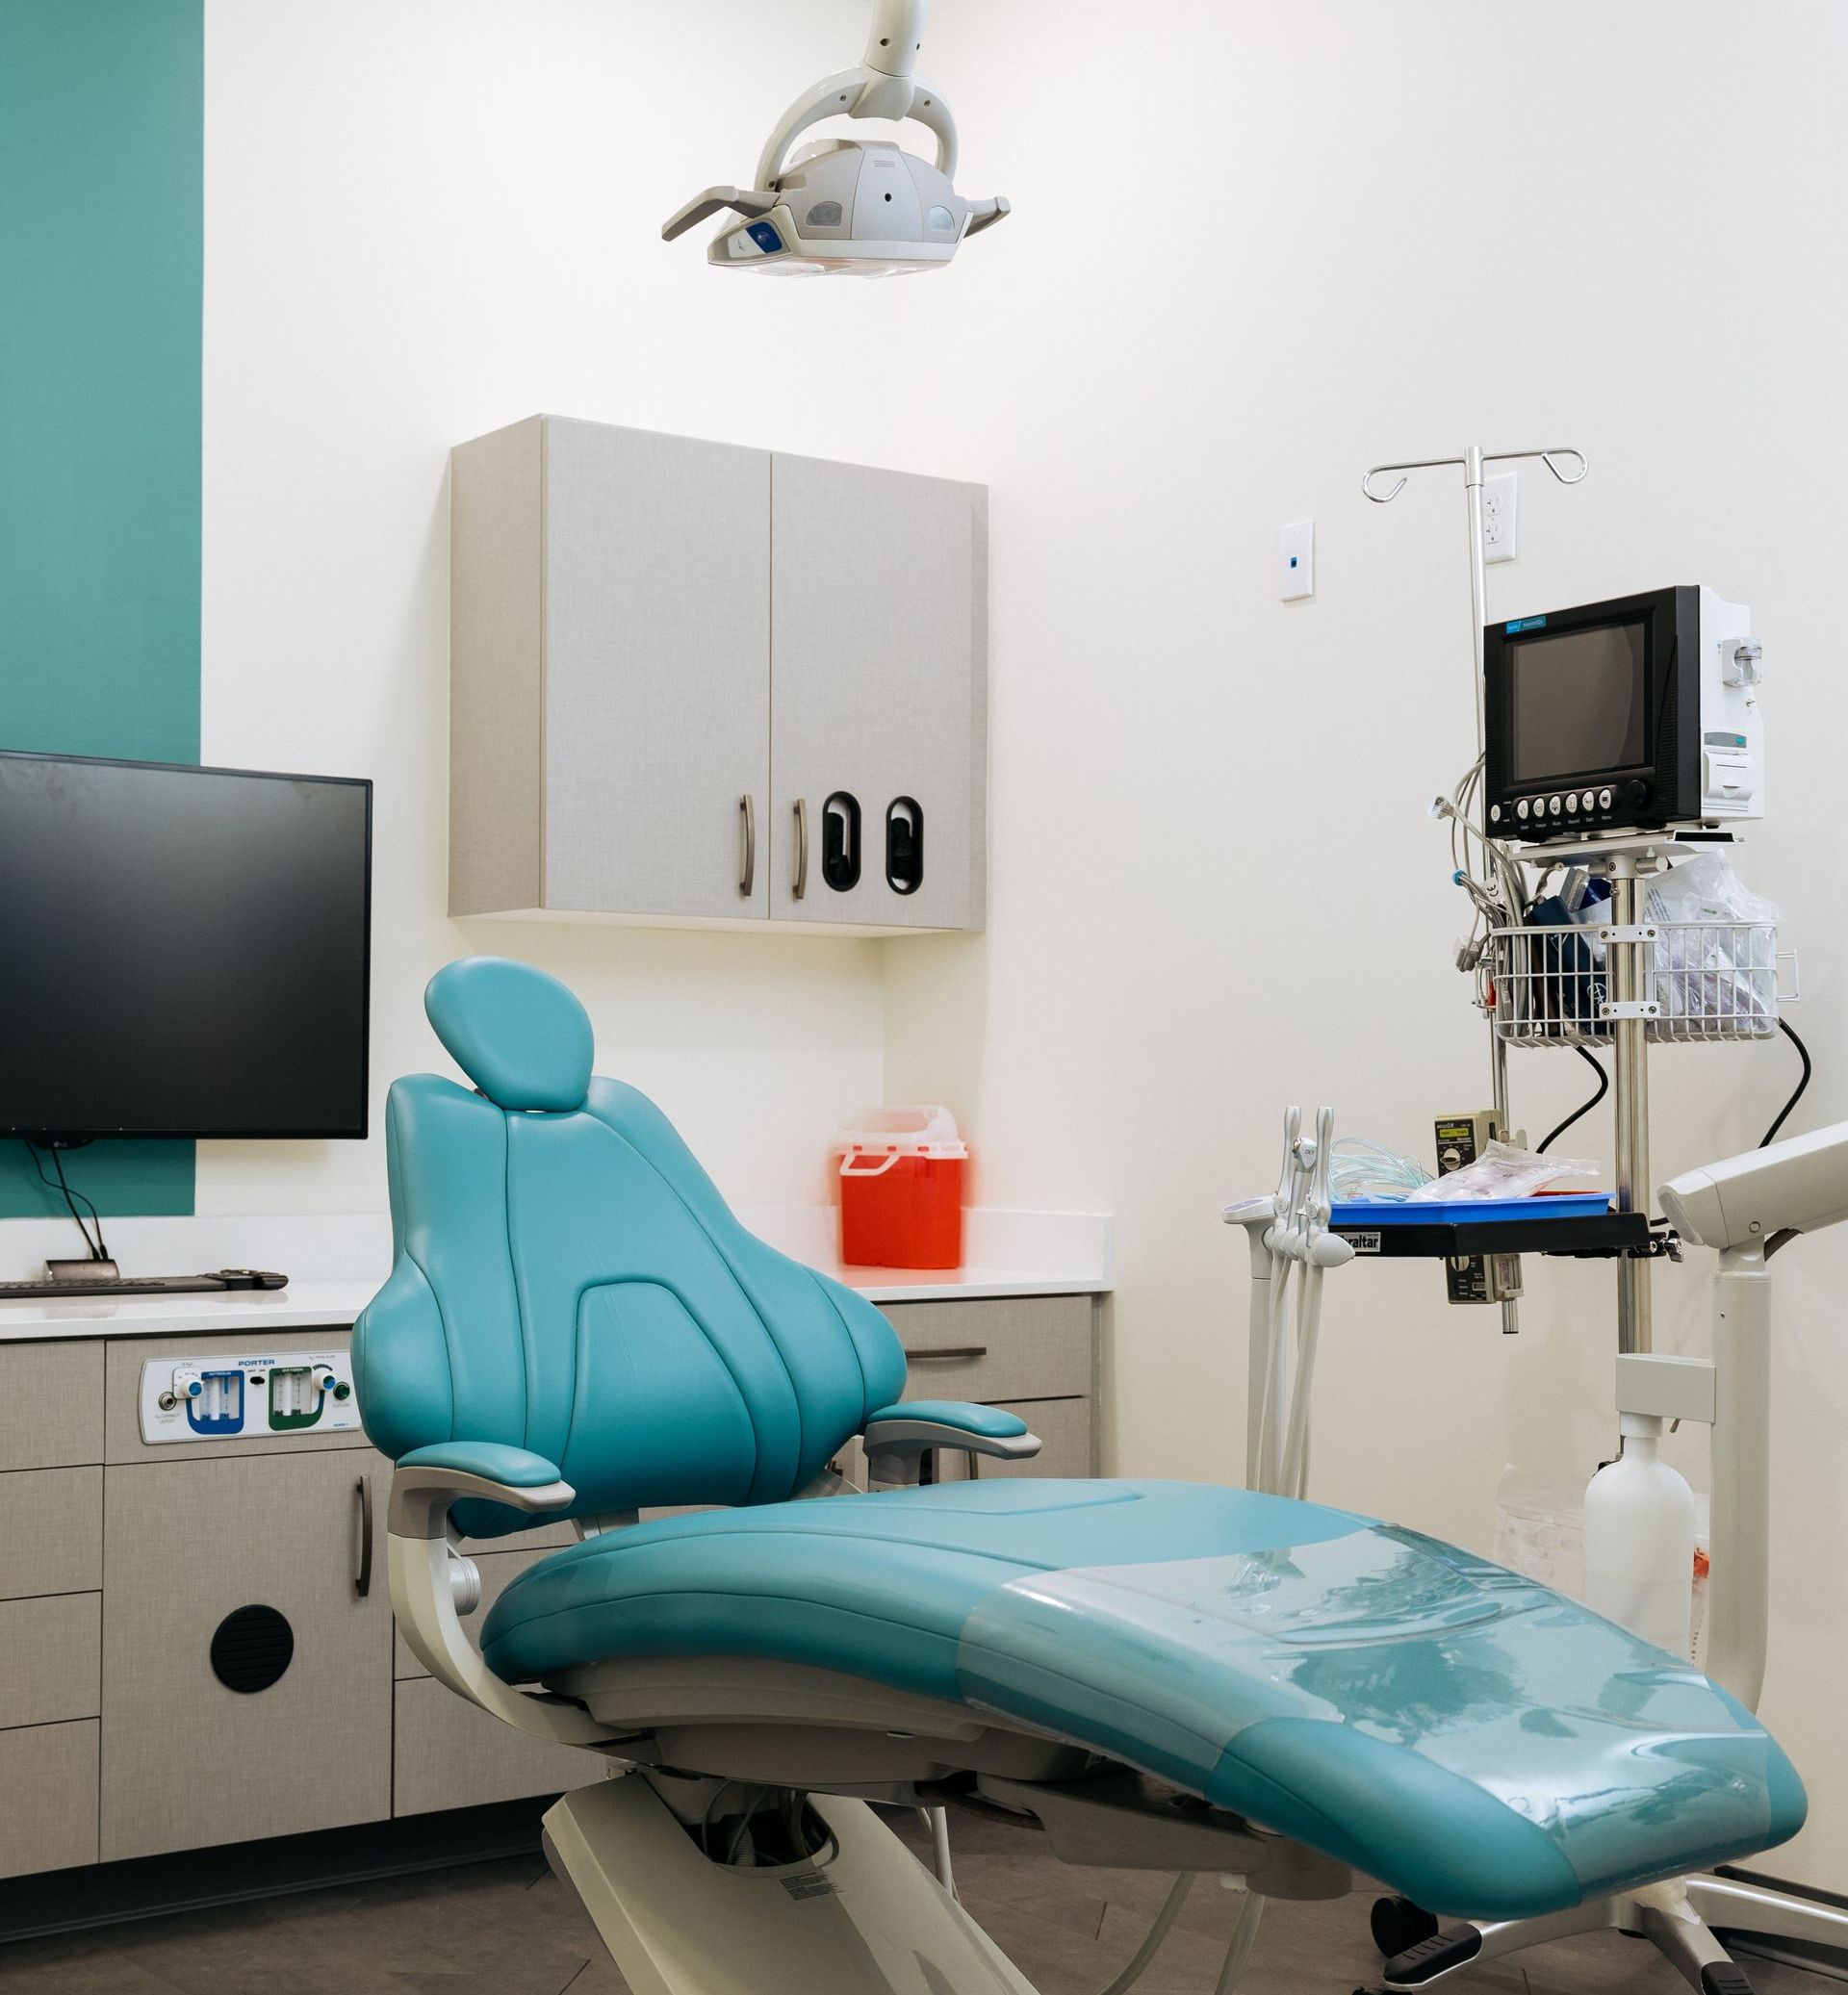 a look inside Exo's sedation room where you can have the comfort while getting a dental procedure done